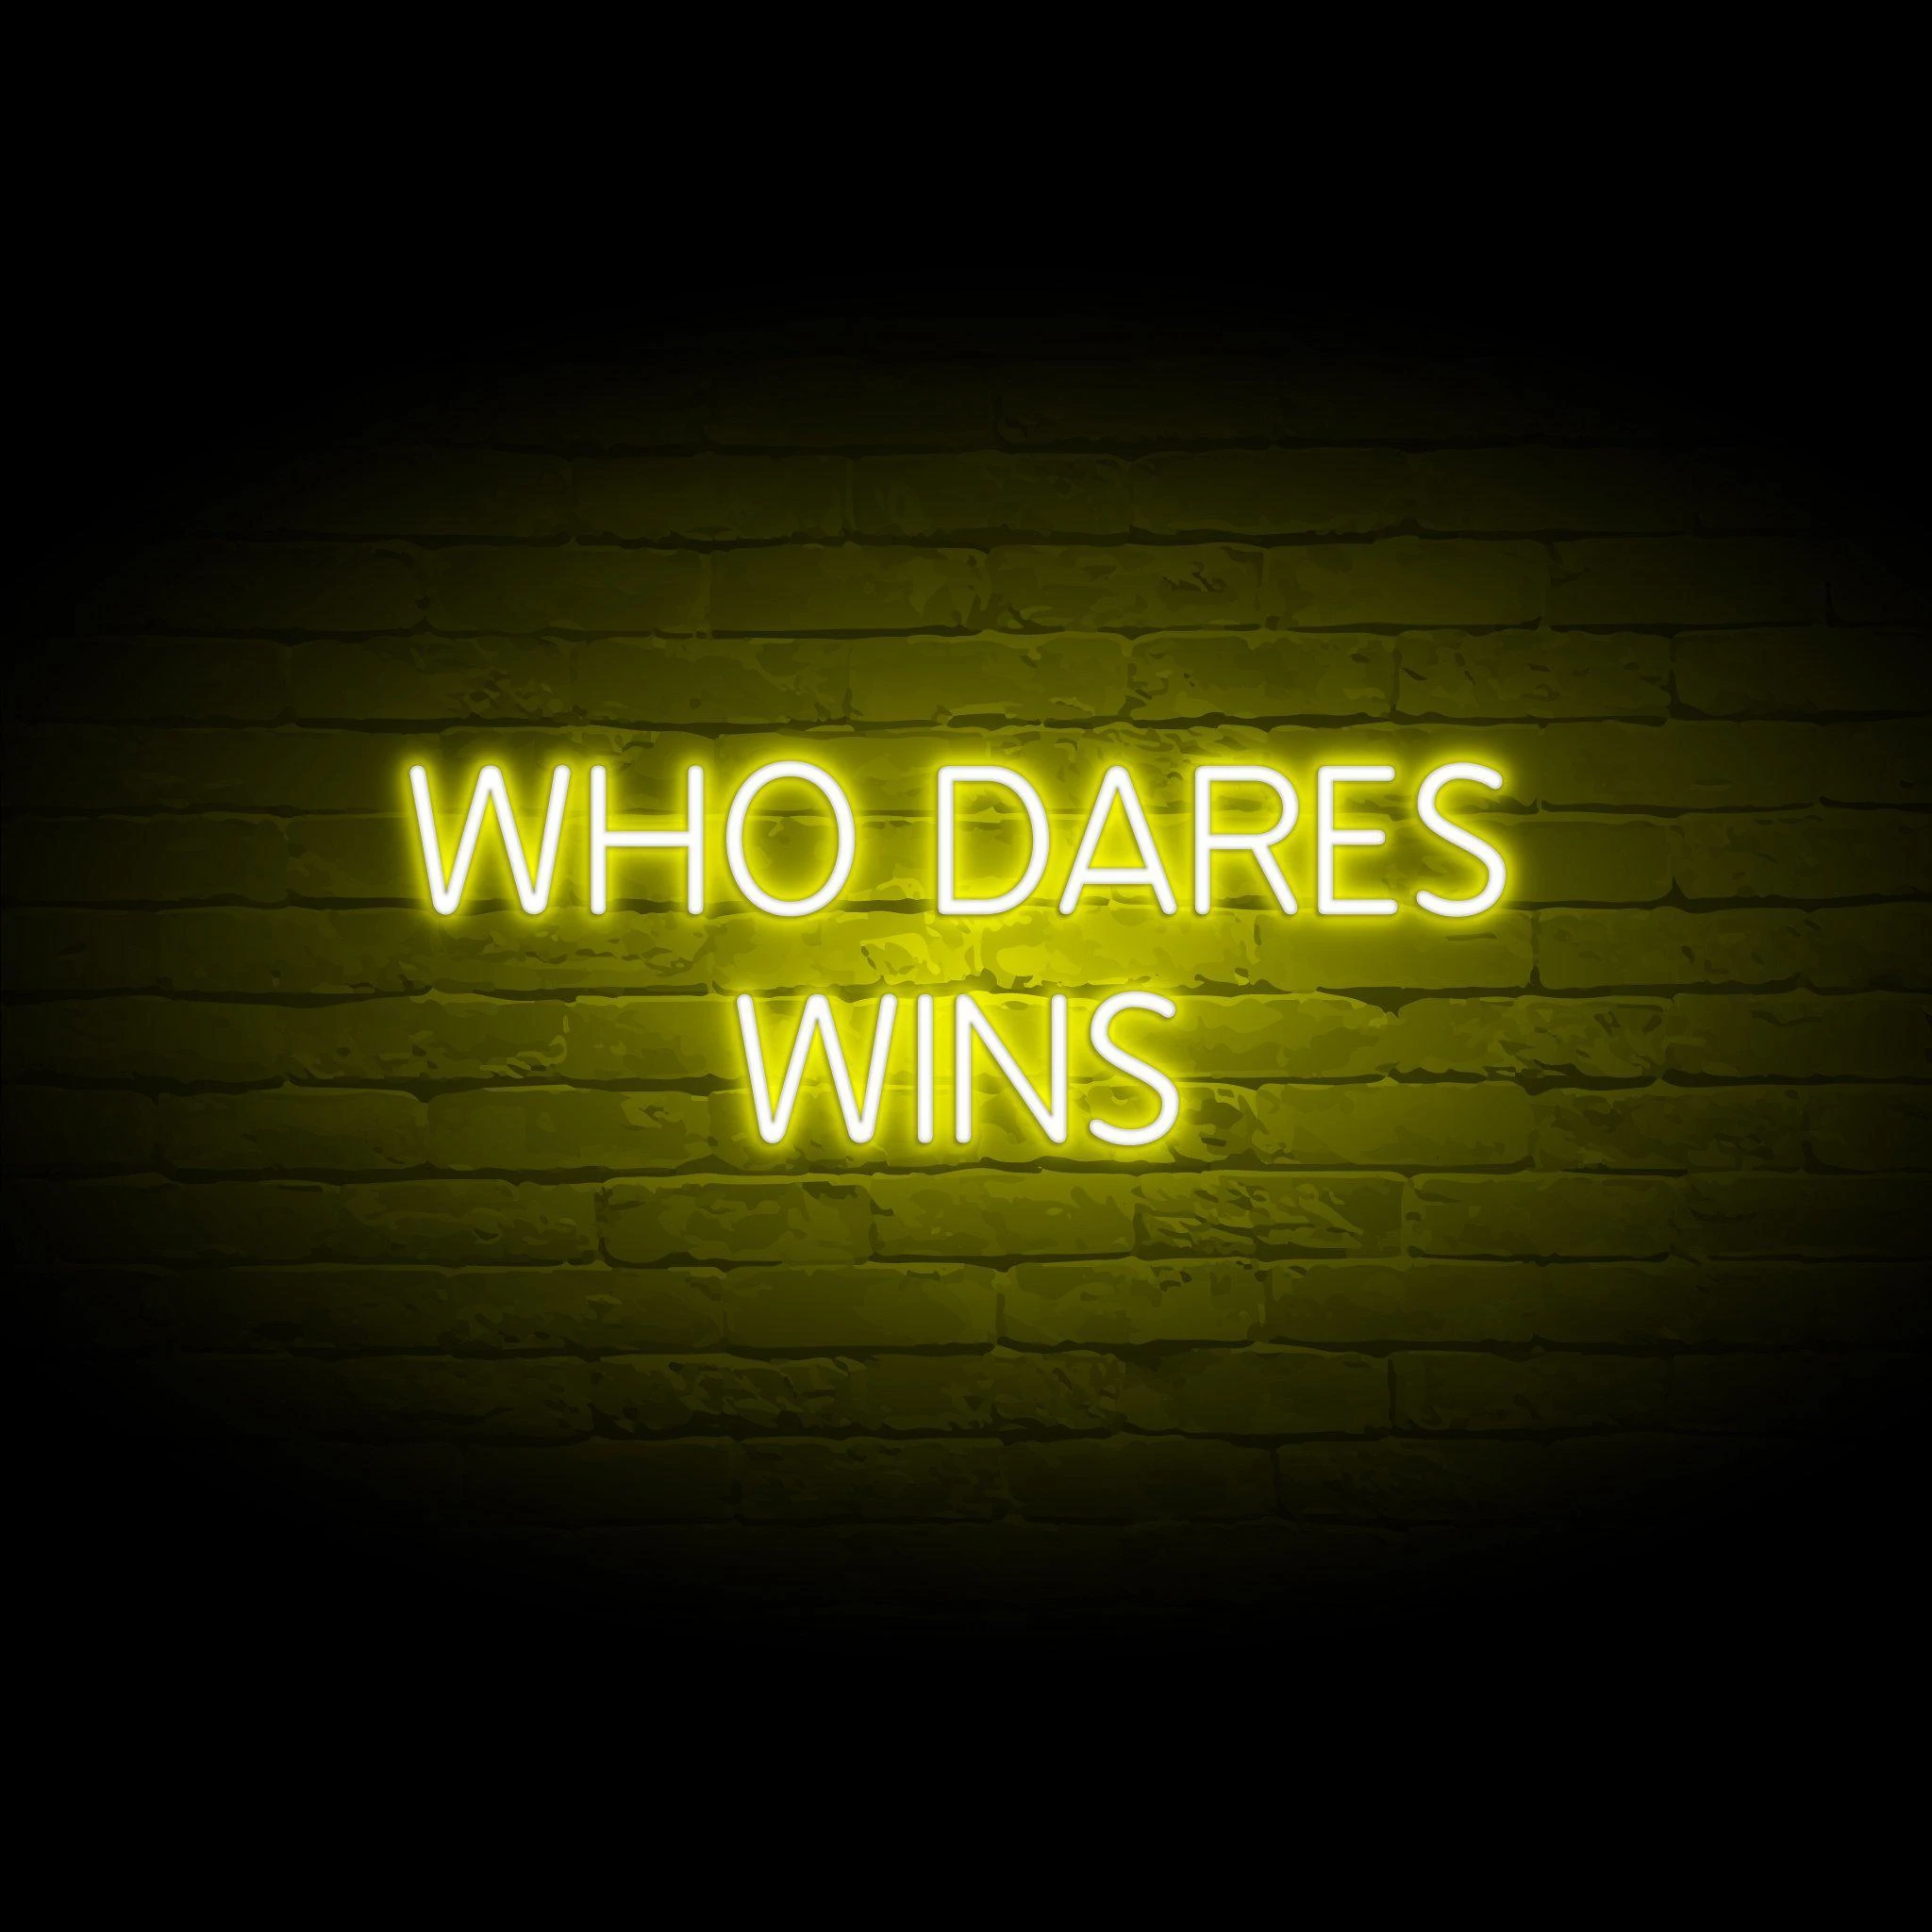 'WHO DARES WINS' NEON SIGN